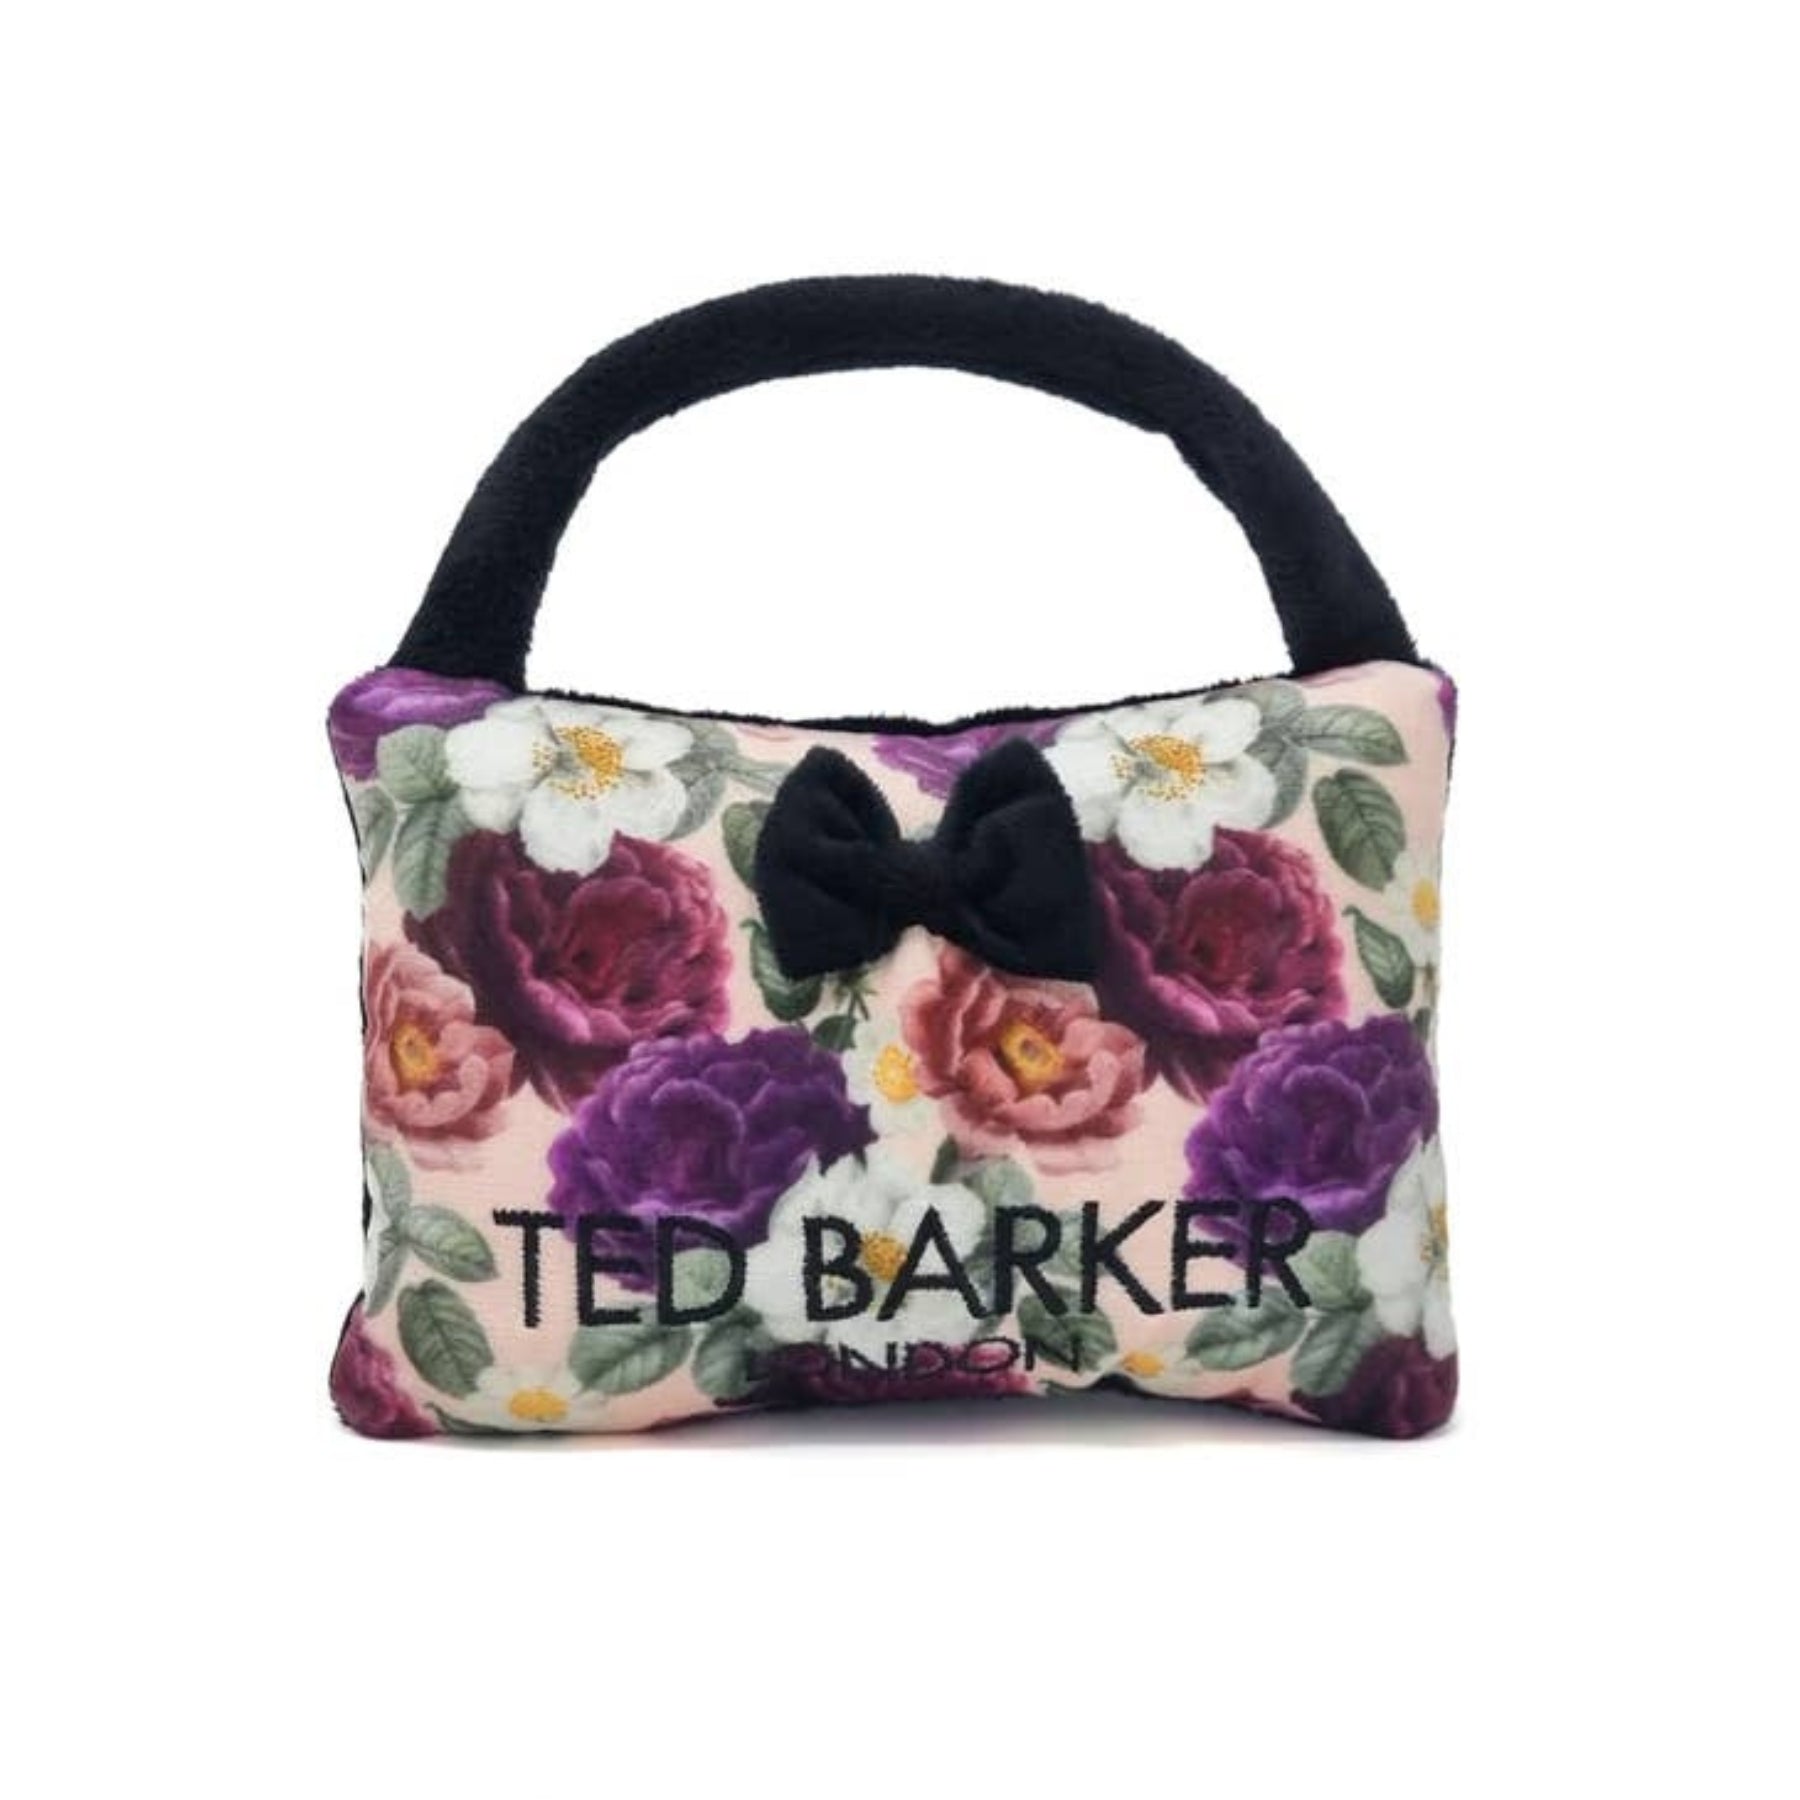 Ted Barker Bag Toy - Pooch Luxury